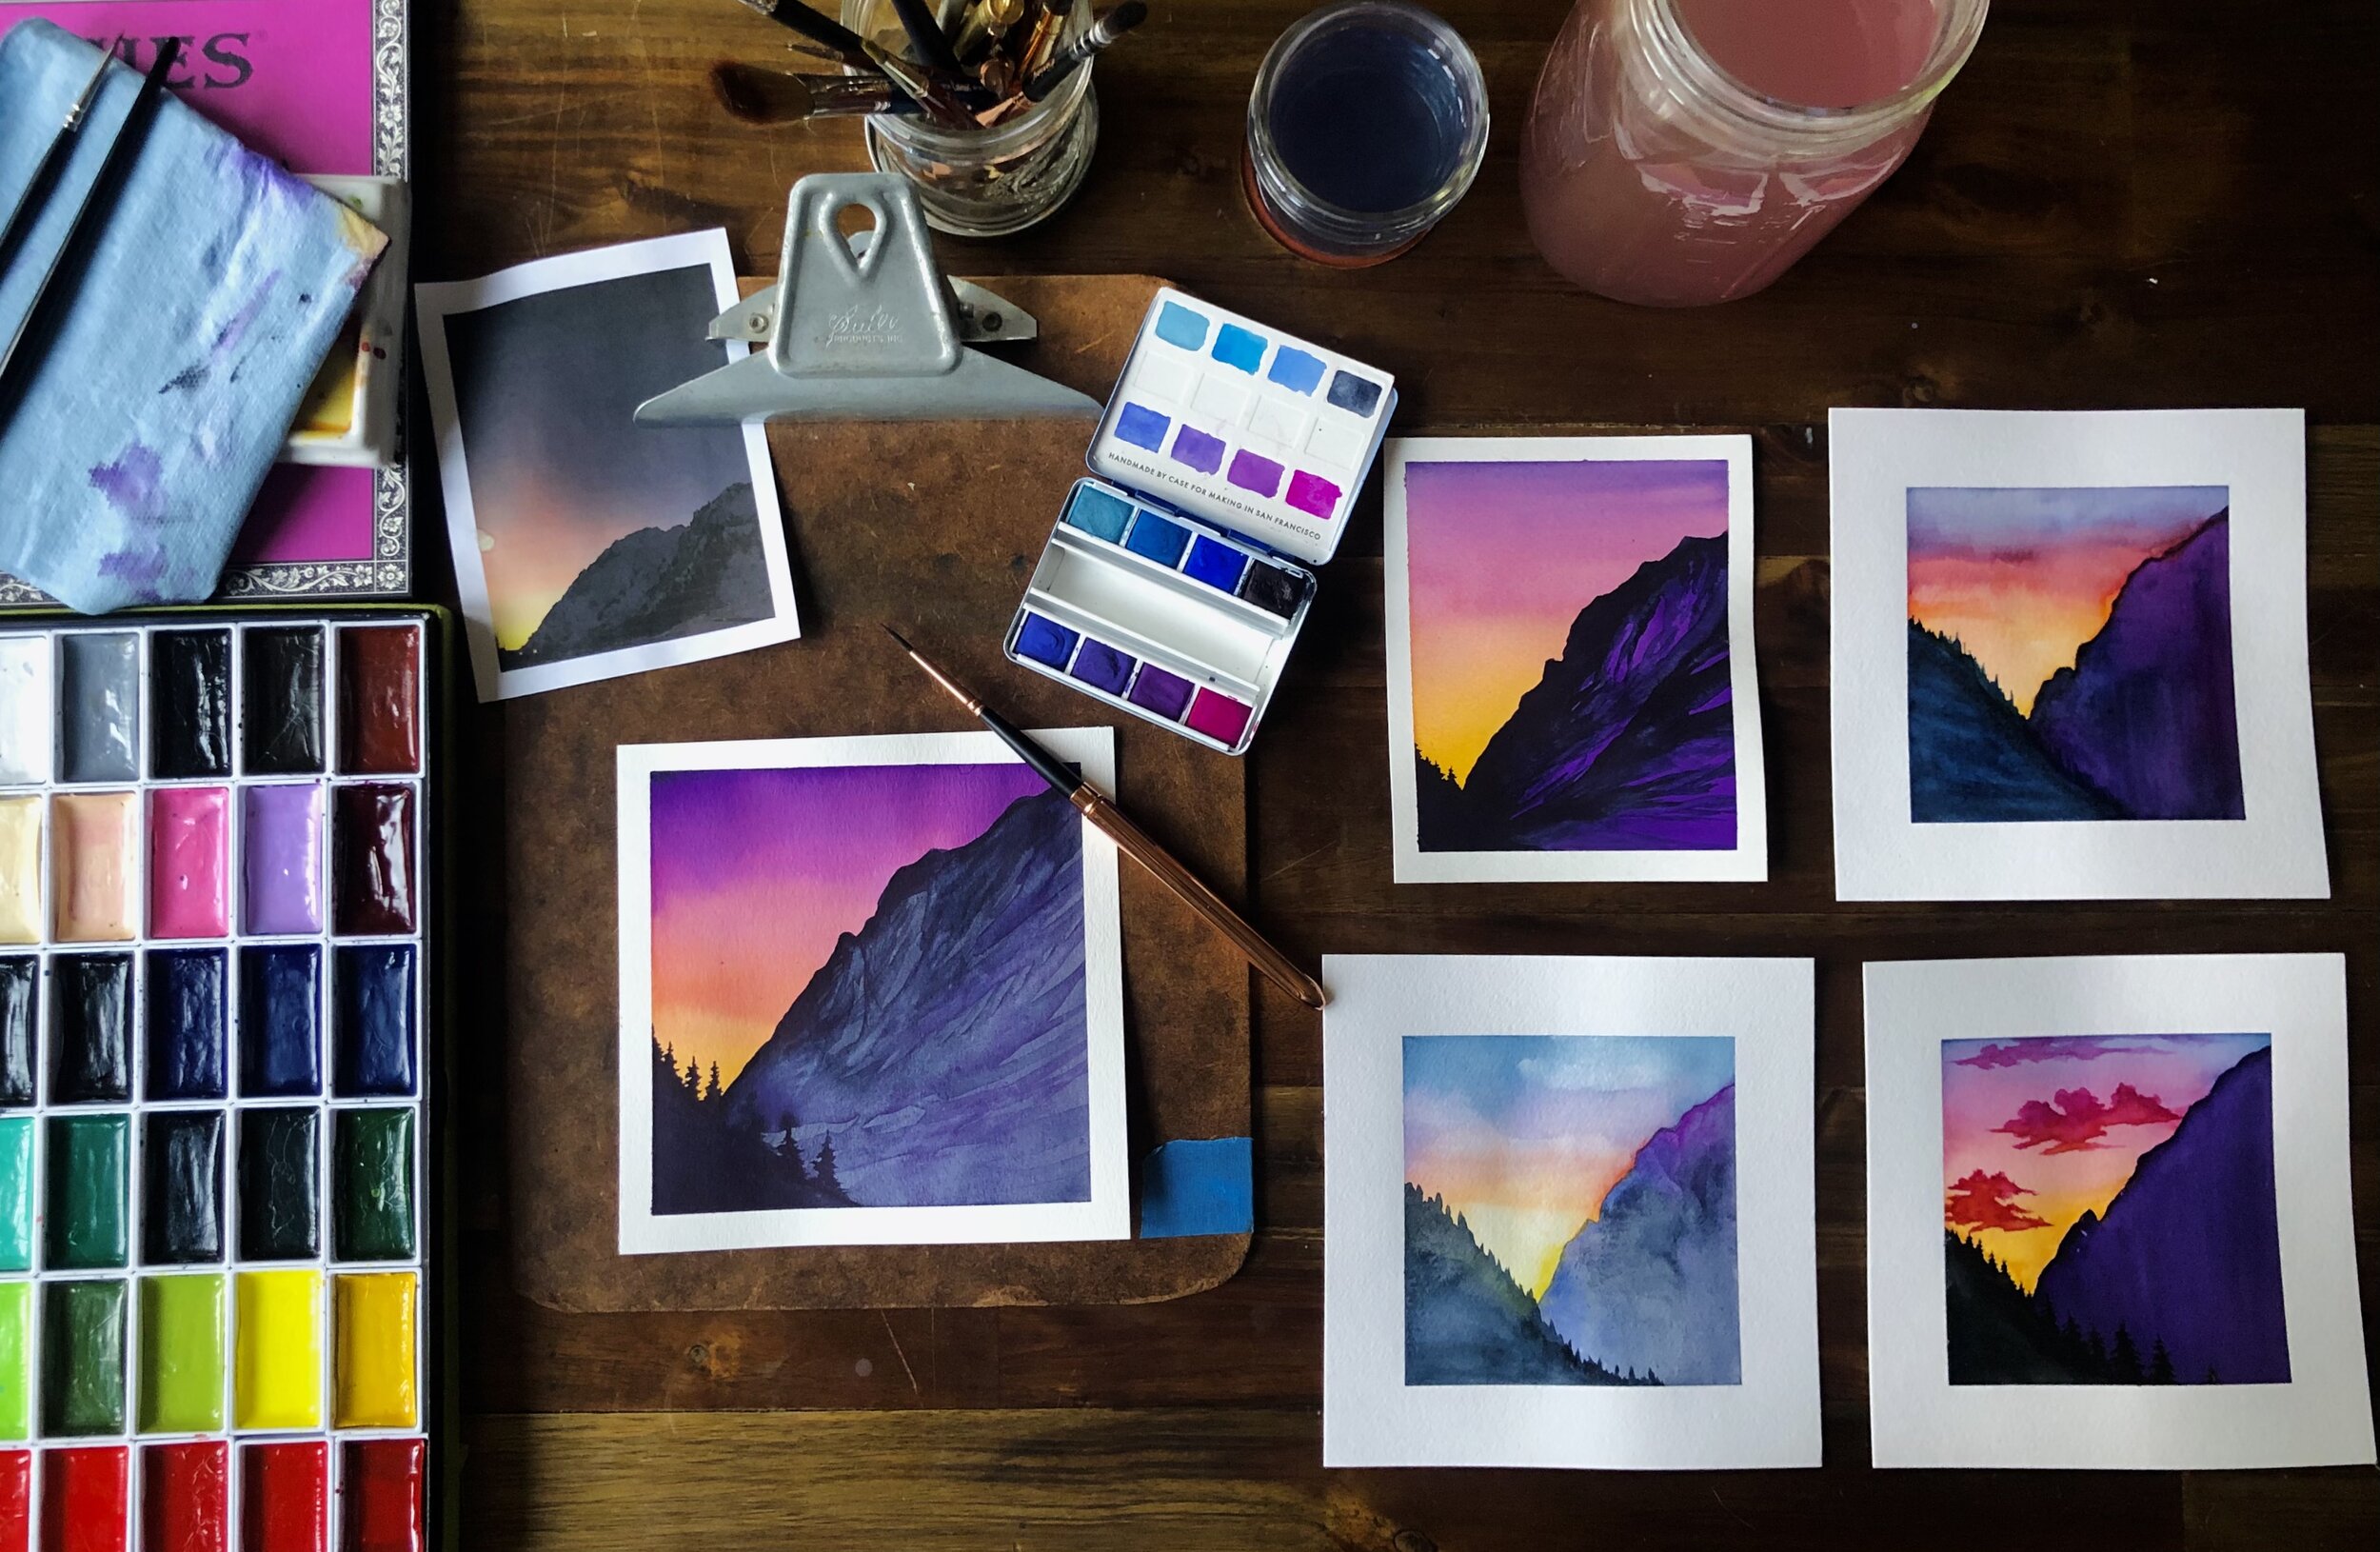 Watercolor Mountains - How to Paint Mountains for Beginners